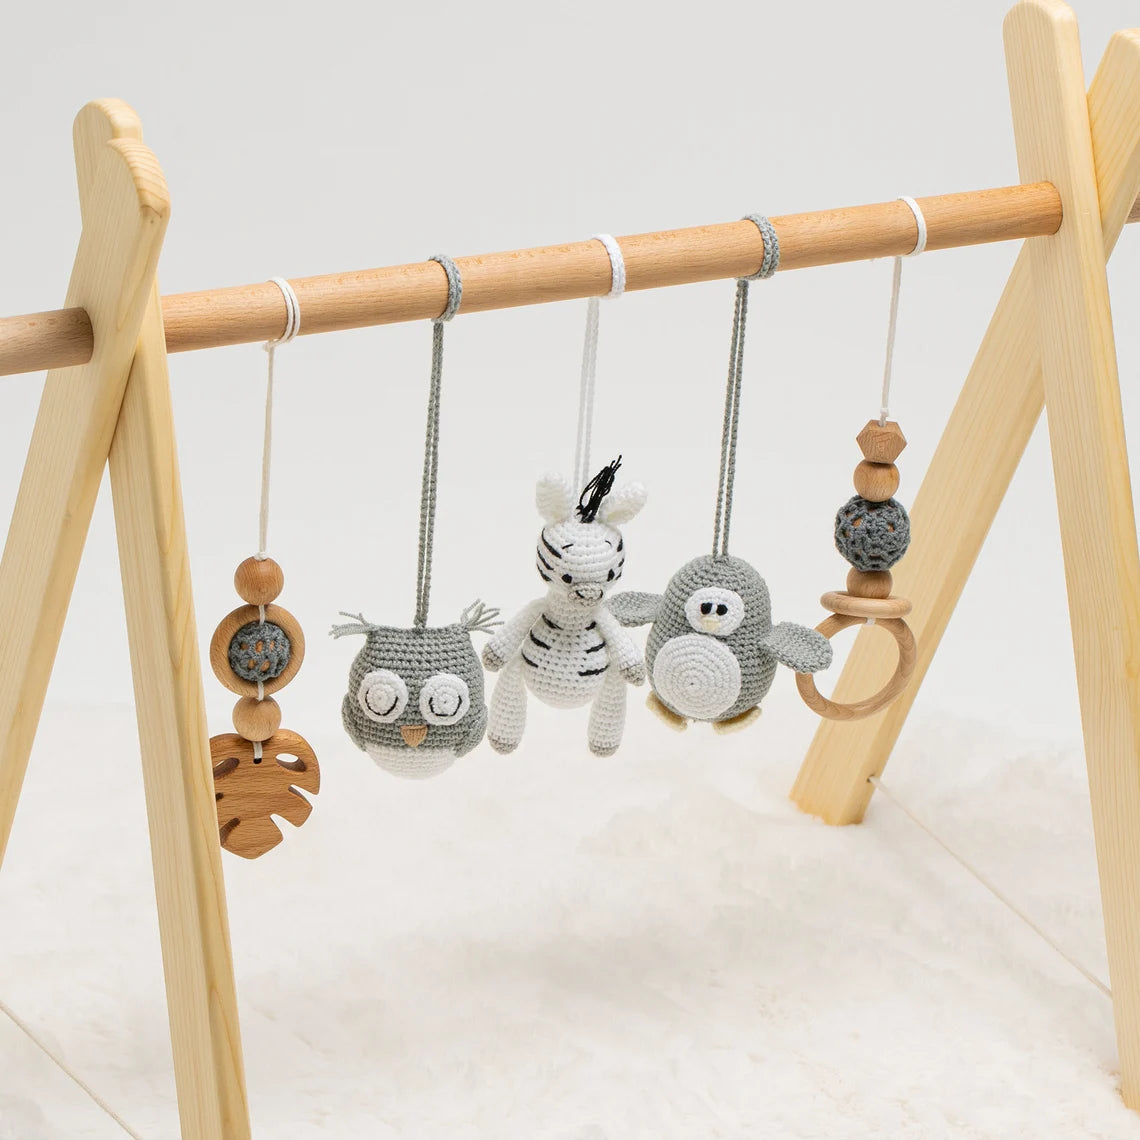 Baby Play Gym, Natural Wood Play Gym for Babies, Wooden Baby Gym with Crocheted Toys / PERSONALIZED LETTERS